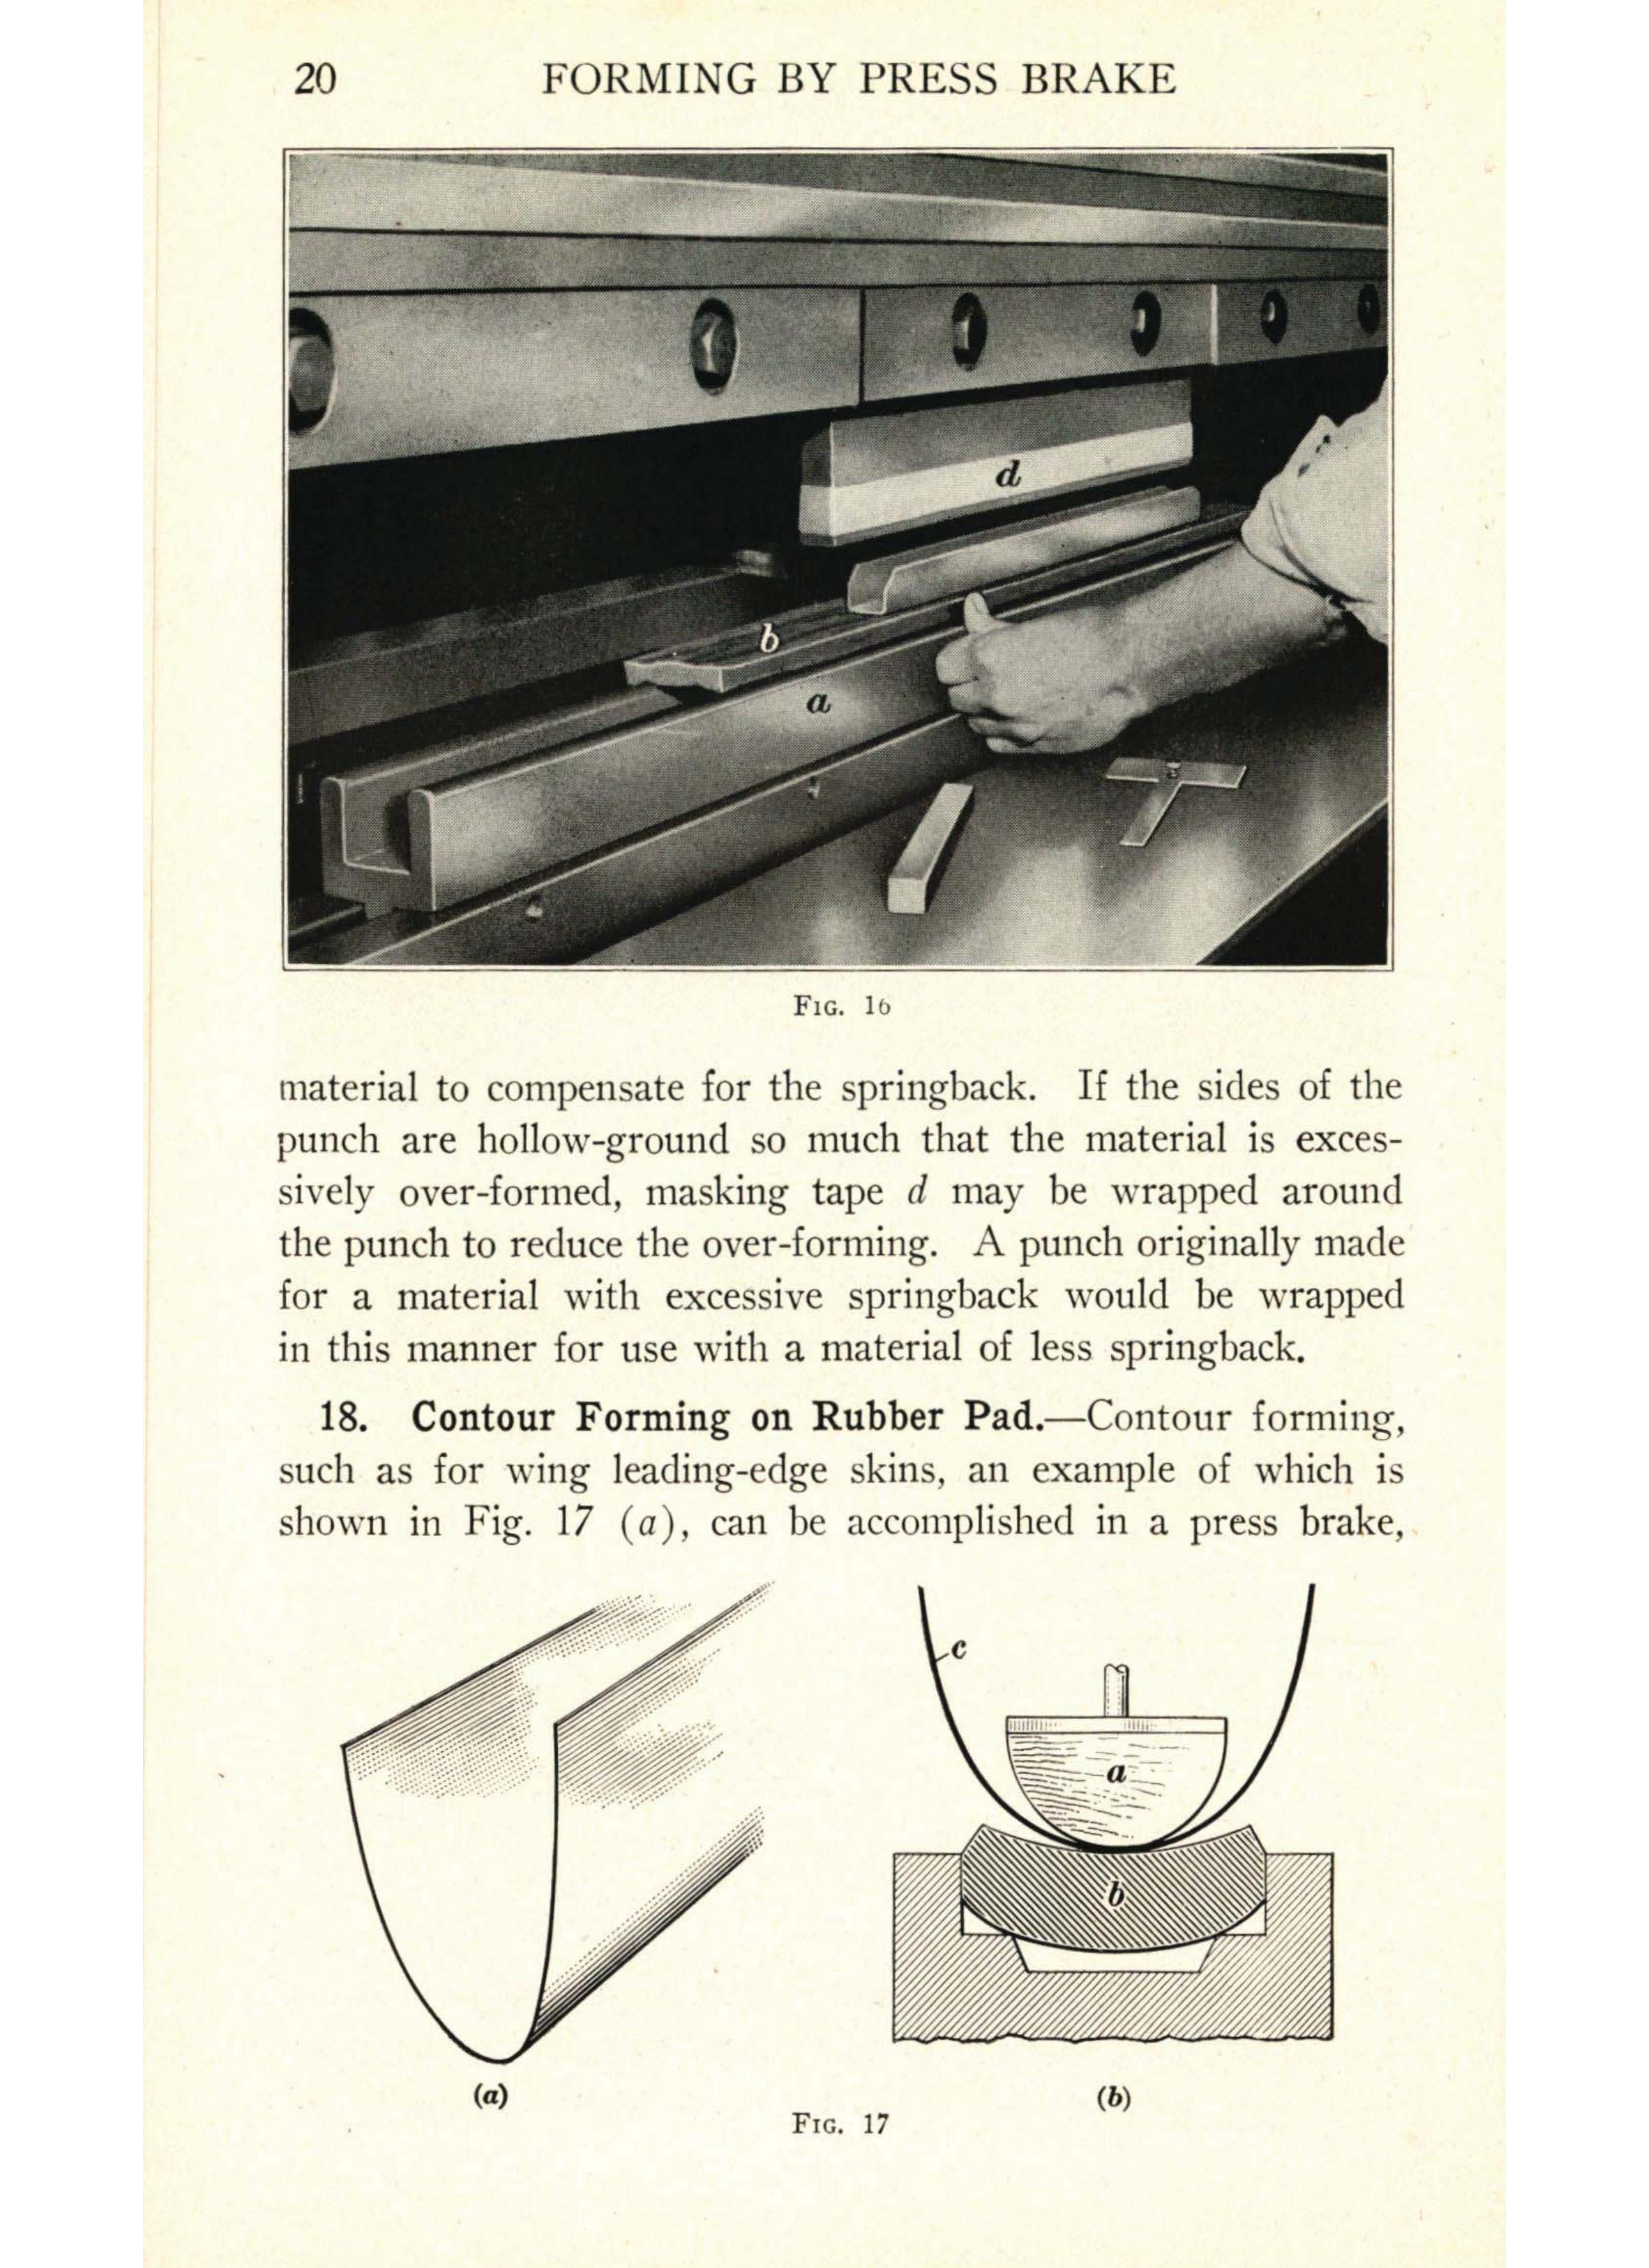 Sample page 22 from AirCorps Library document: Forming Methods - Press Brake - Bureau of Aeronautics